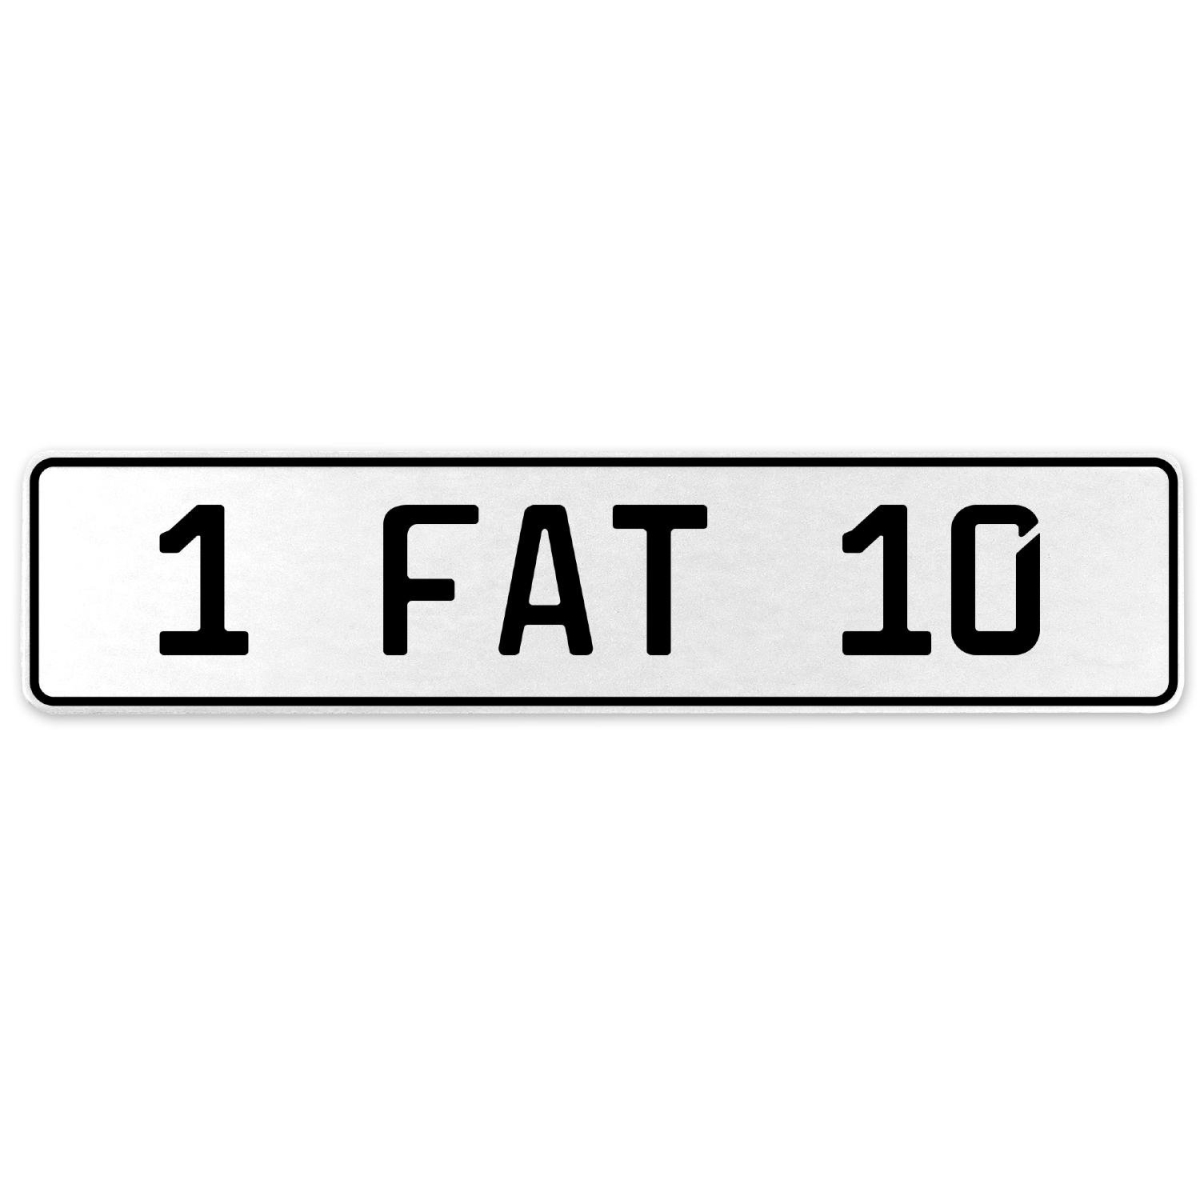 554607 1 Fat 10 - White Aluminum Street Sign Mancave Euro Plate Name Door Sign Wall